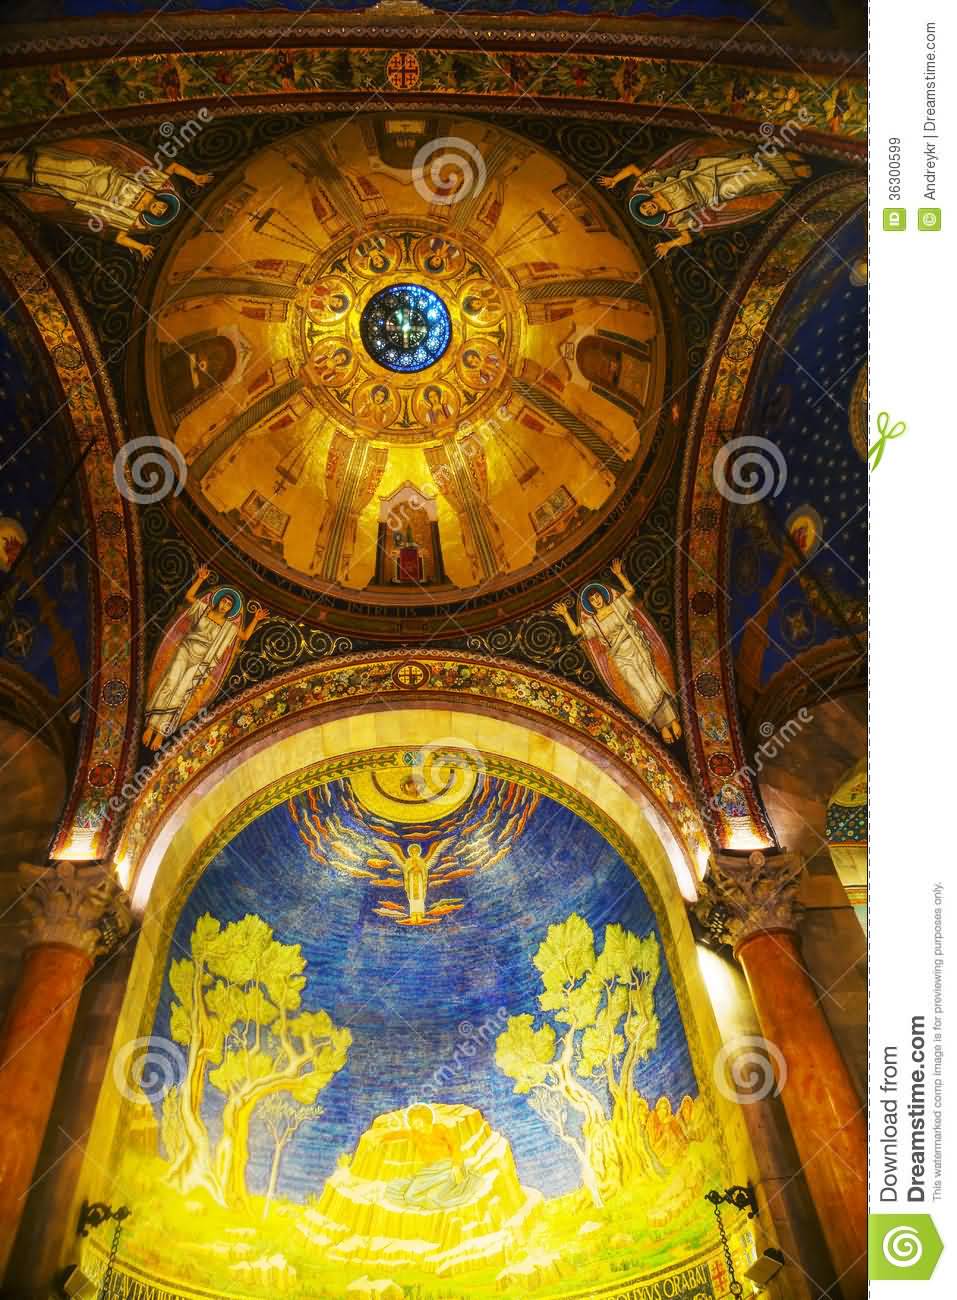 Adorable Ceiling Architecture Inside The Church Of All Nations